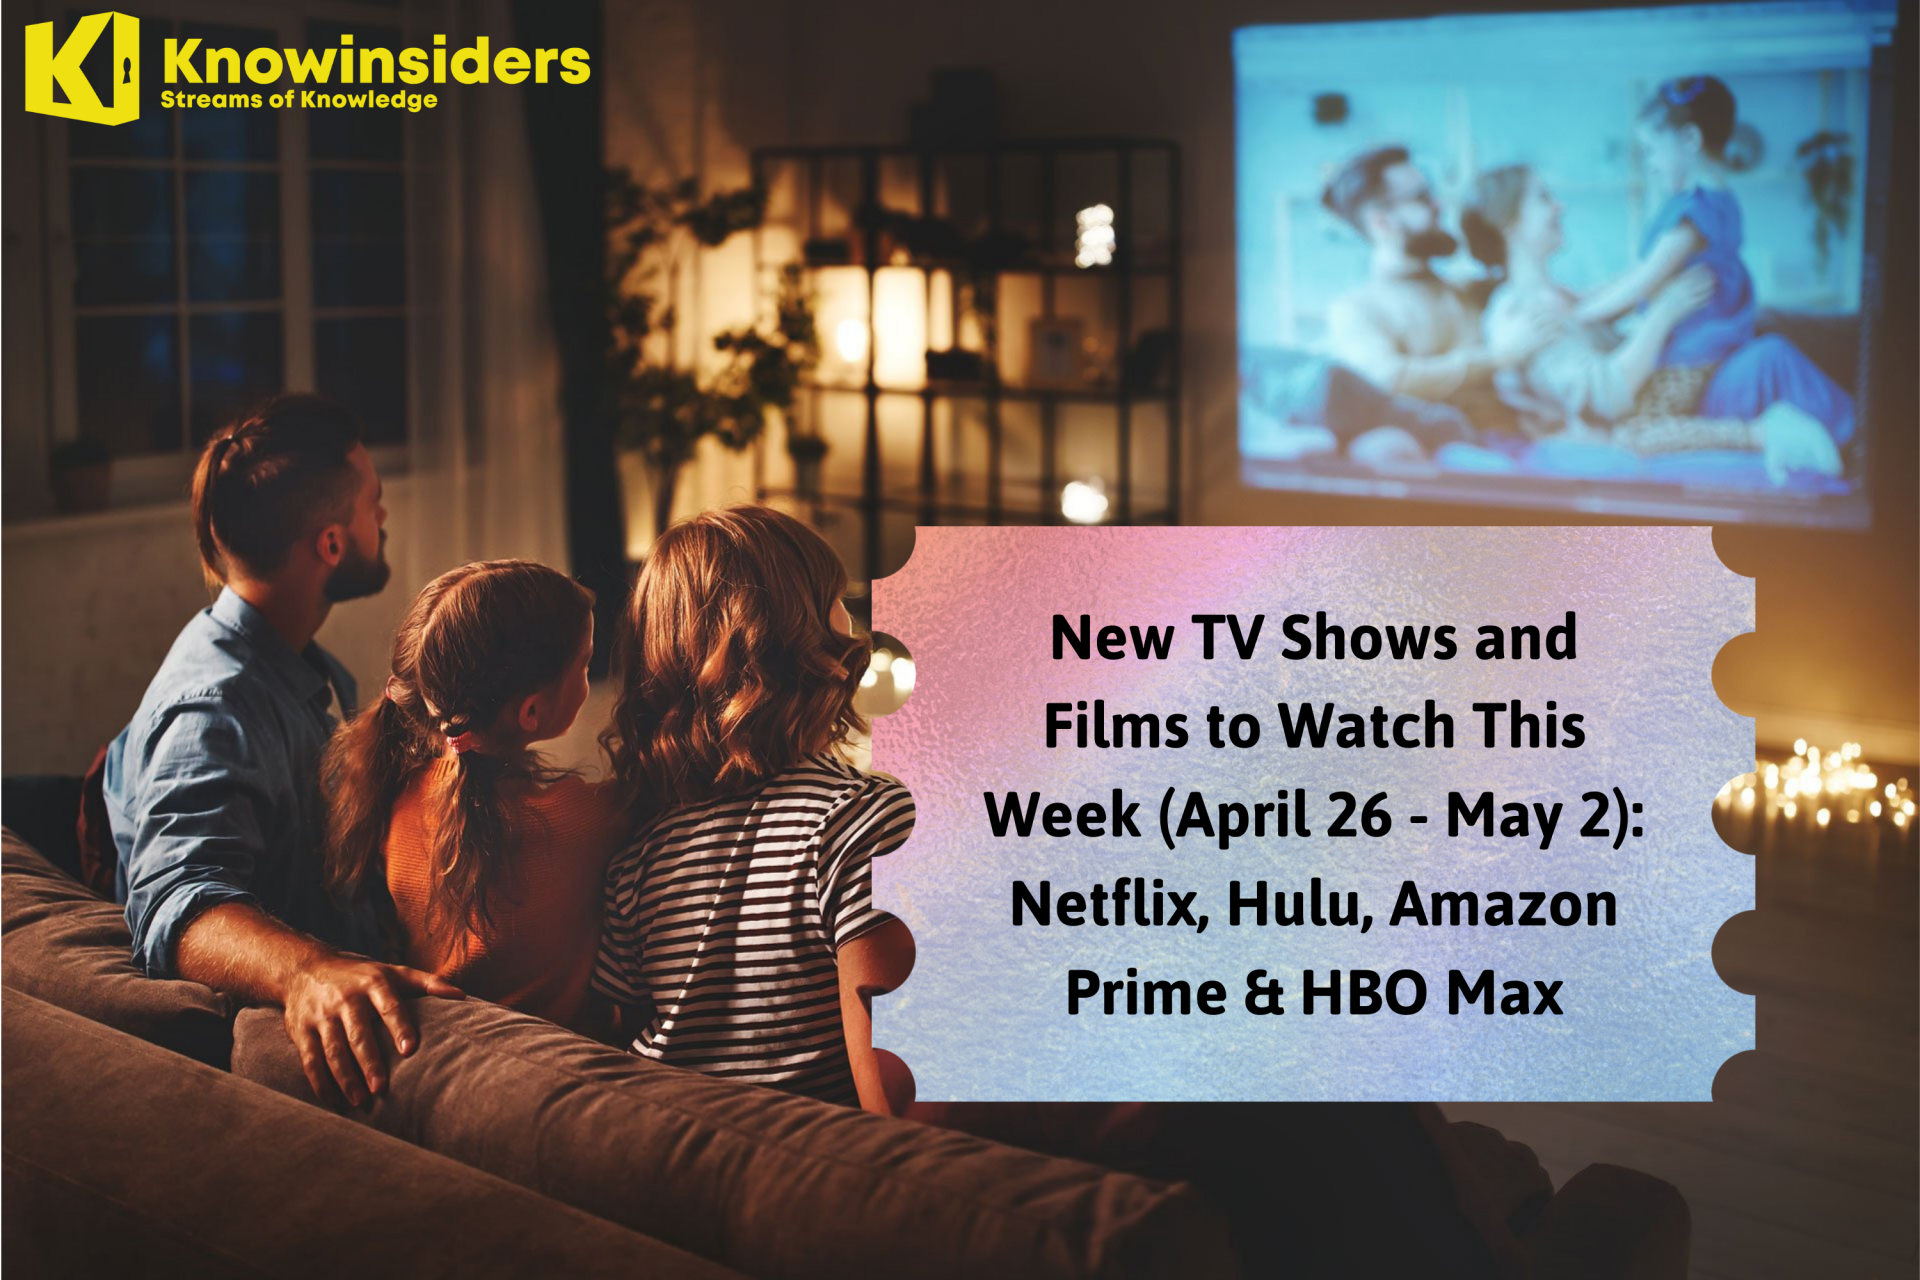 New TV Shows and Films to Watch This Week (April 26 - May 2): Netflix, Hulu, Amazon Prime & HBO Max